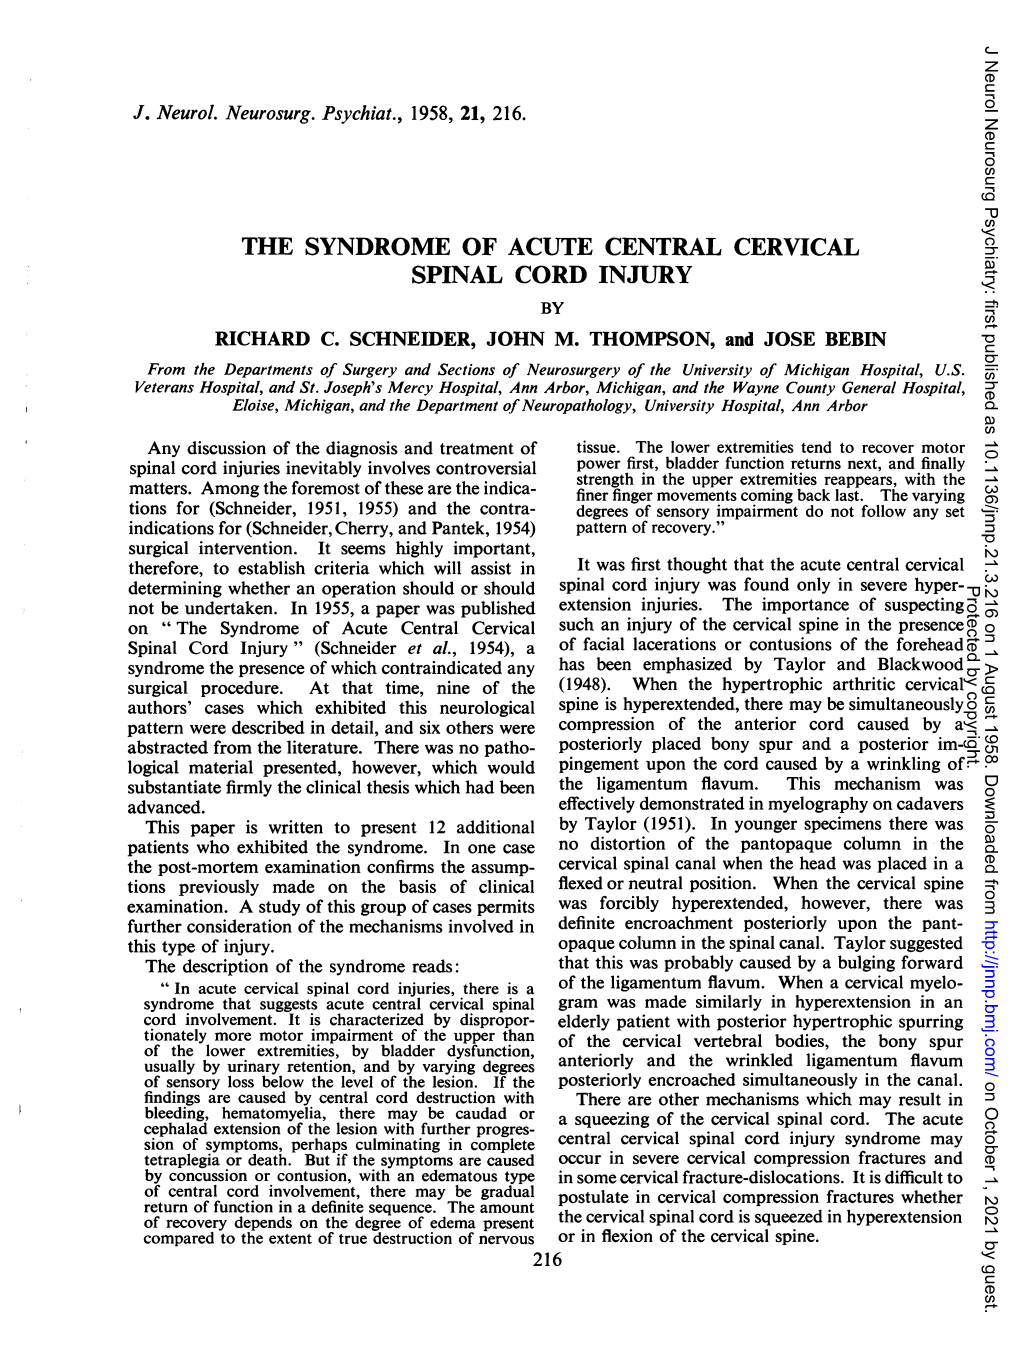 The Syndrome of Acute Central Cervical Spinal Cord Injury by Richard C